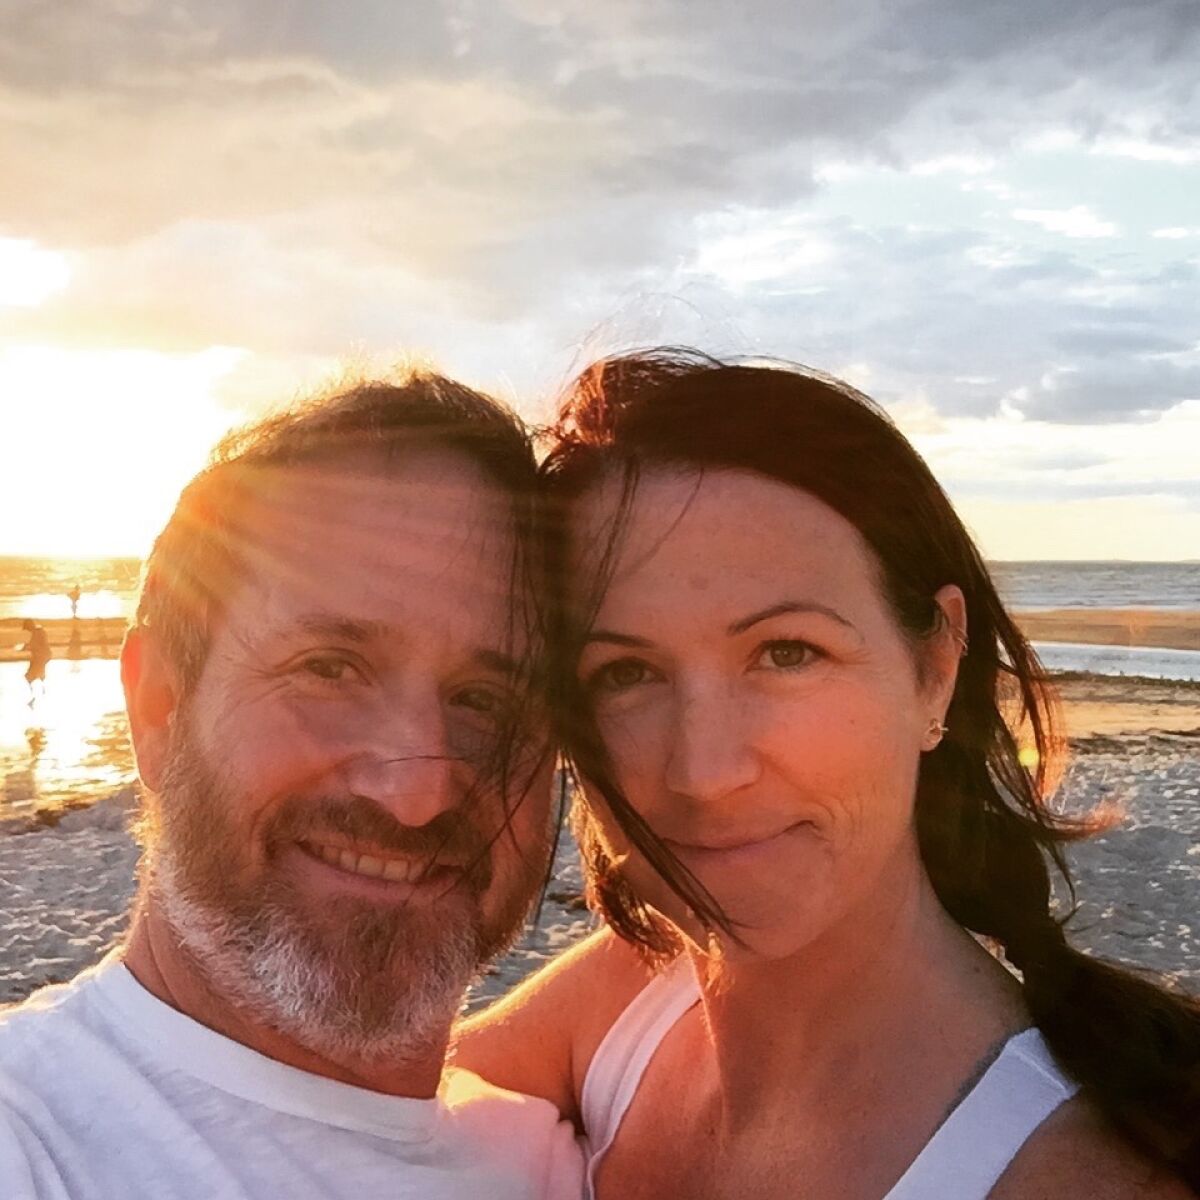 Sam Kolb and his wife, Karin Kolb, pictured in July 2015 at Cape Cod in Massachusetts.